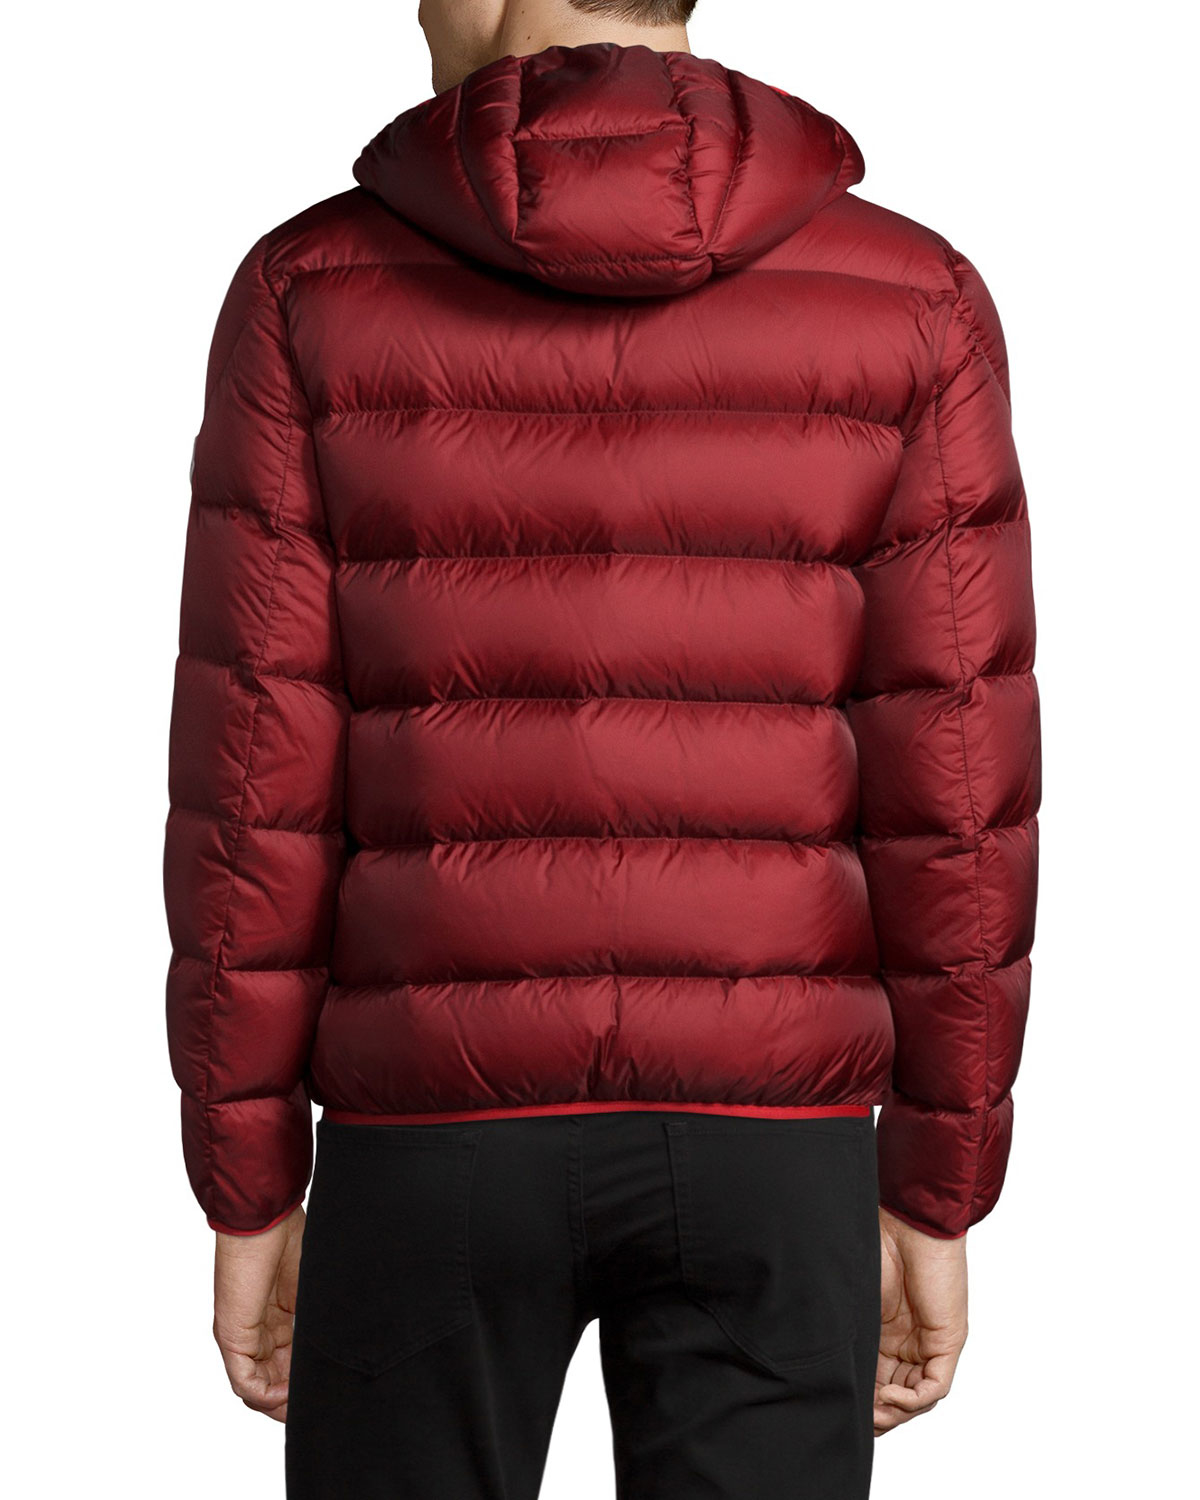 Lyst - Moncler Chauvon Hooded Puffer Jacket in Purple for Men